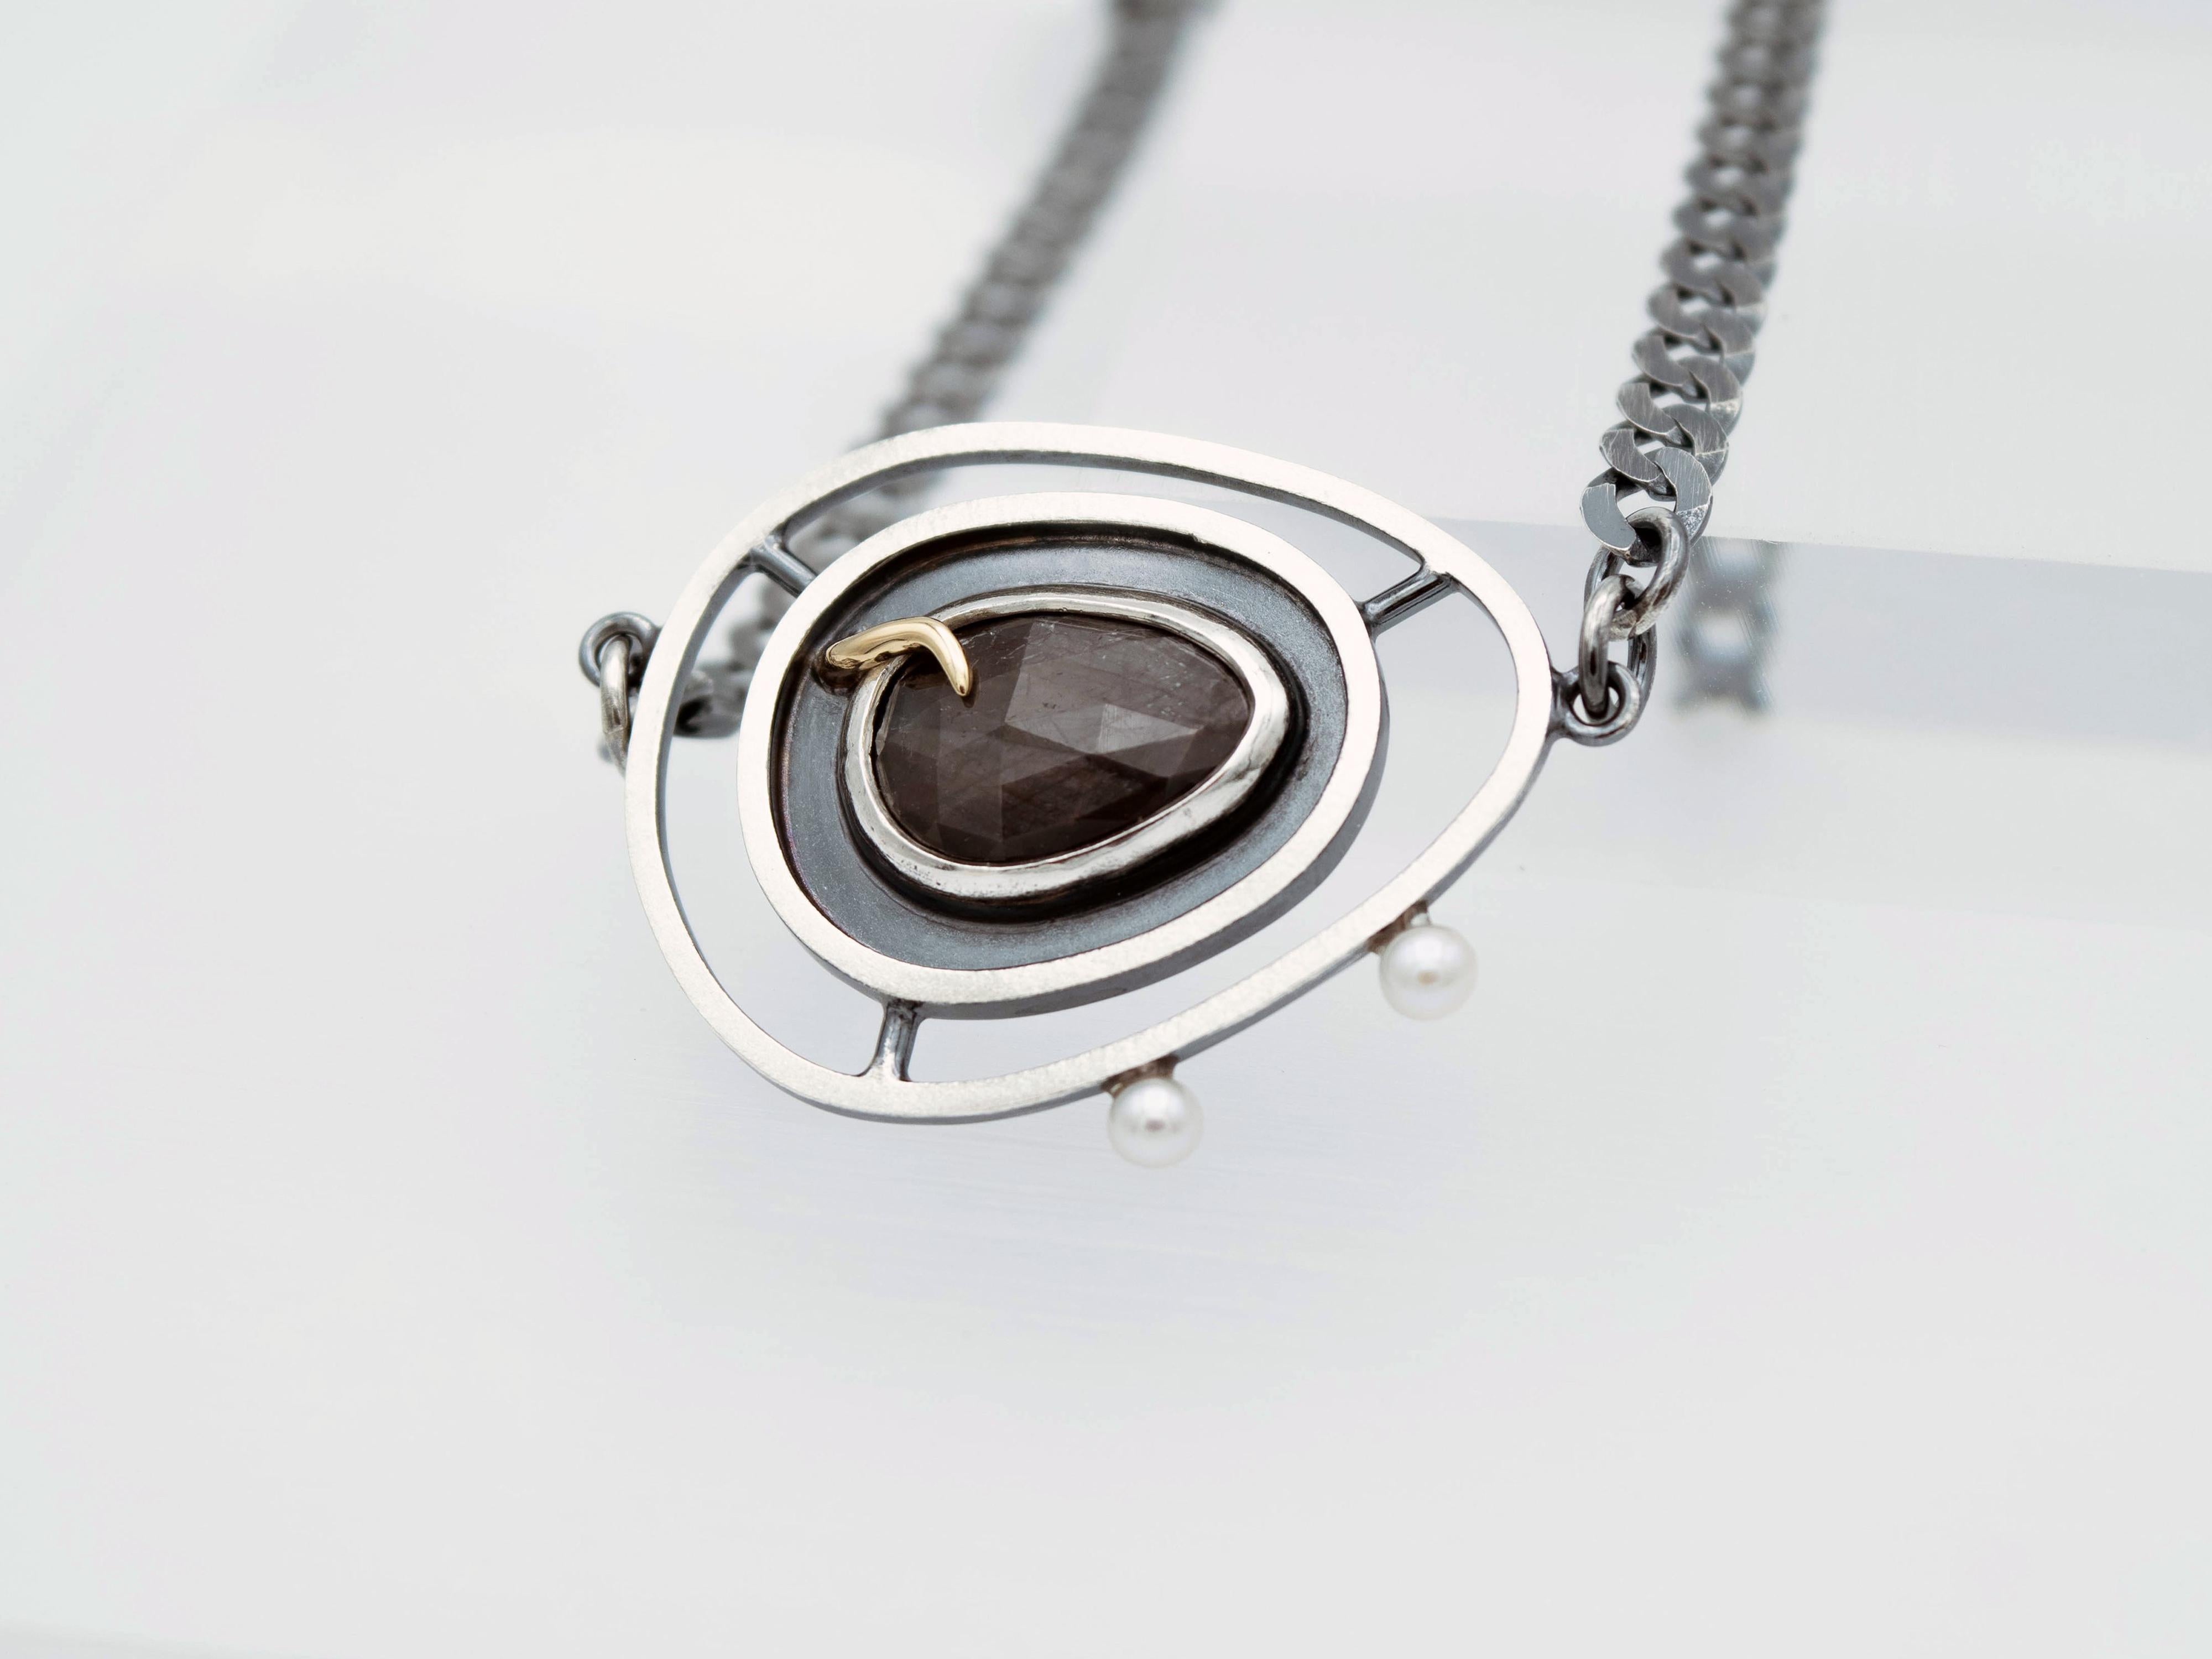 Black Sapphire Pearl 14K Sterling Silver Abyss Necklace by TIN HAUS 

The Black Sapphire Pearl Abyss Necklace is a modern, one-of-a-kind statement piece that is emblematic of our evening skies. The visual elements of this abstract expressionistic